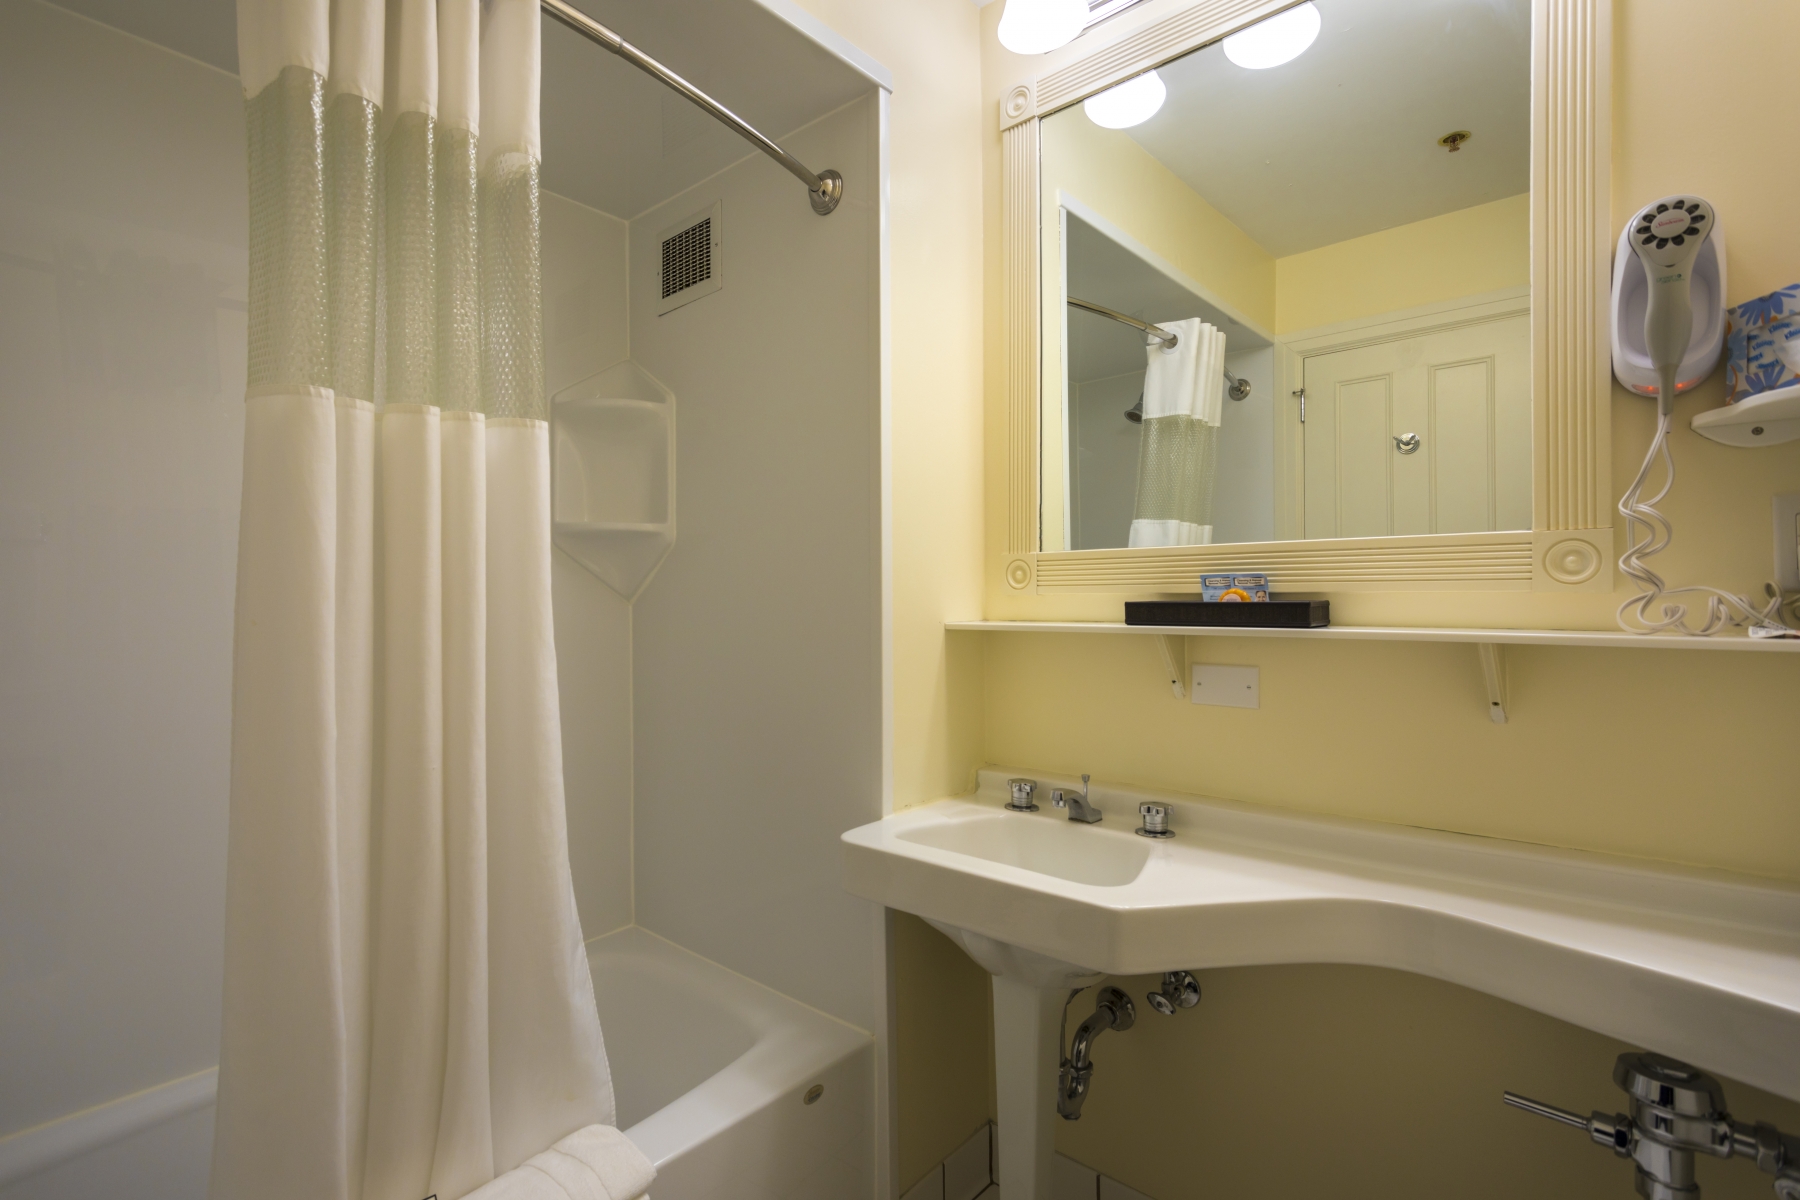 Inside bathroom, with tub, and white curtain 